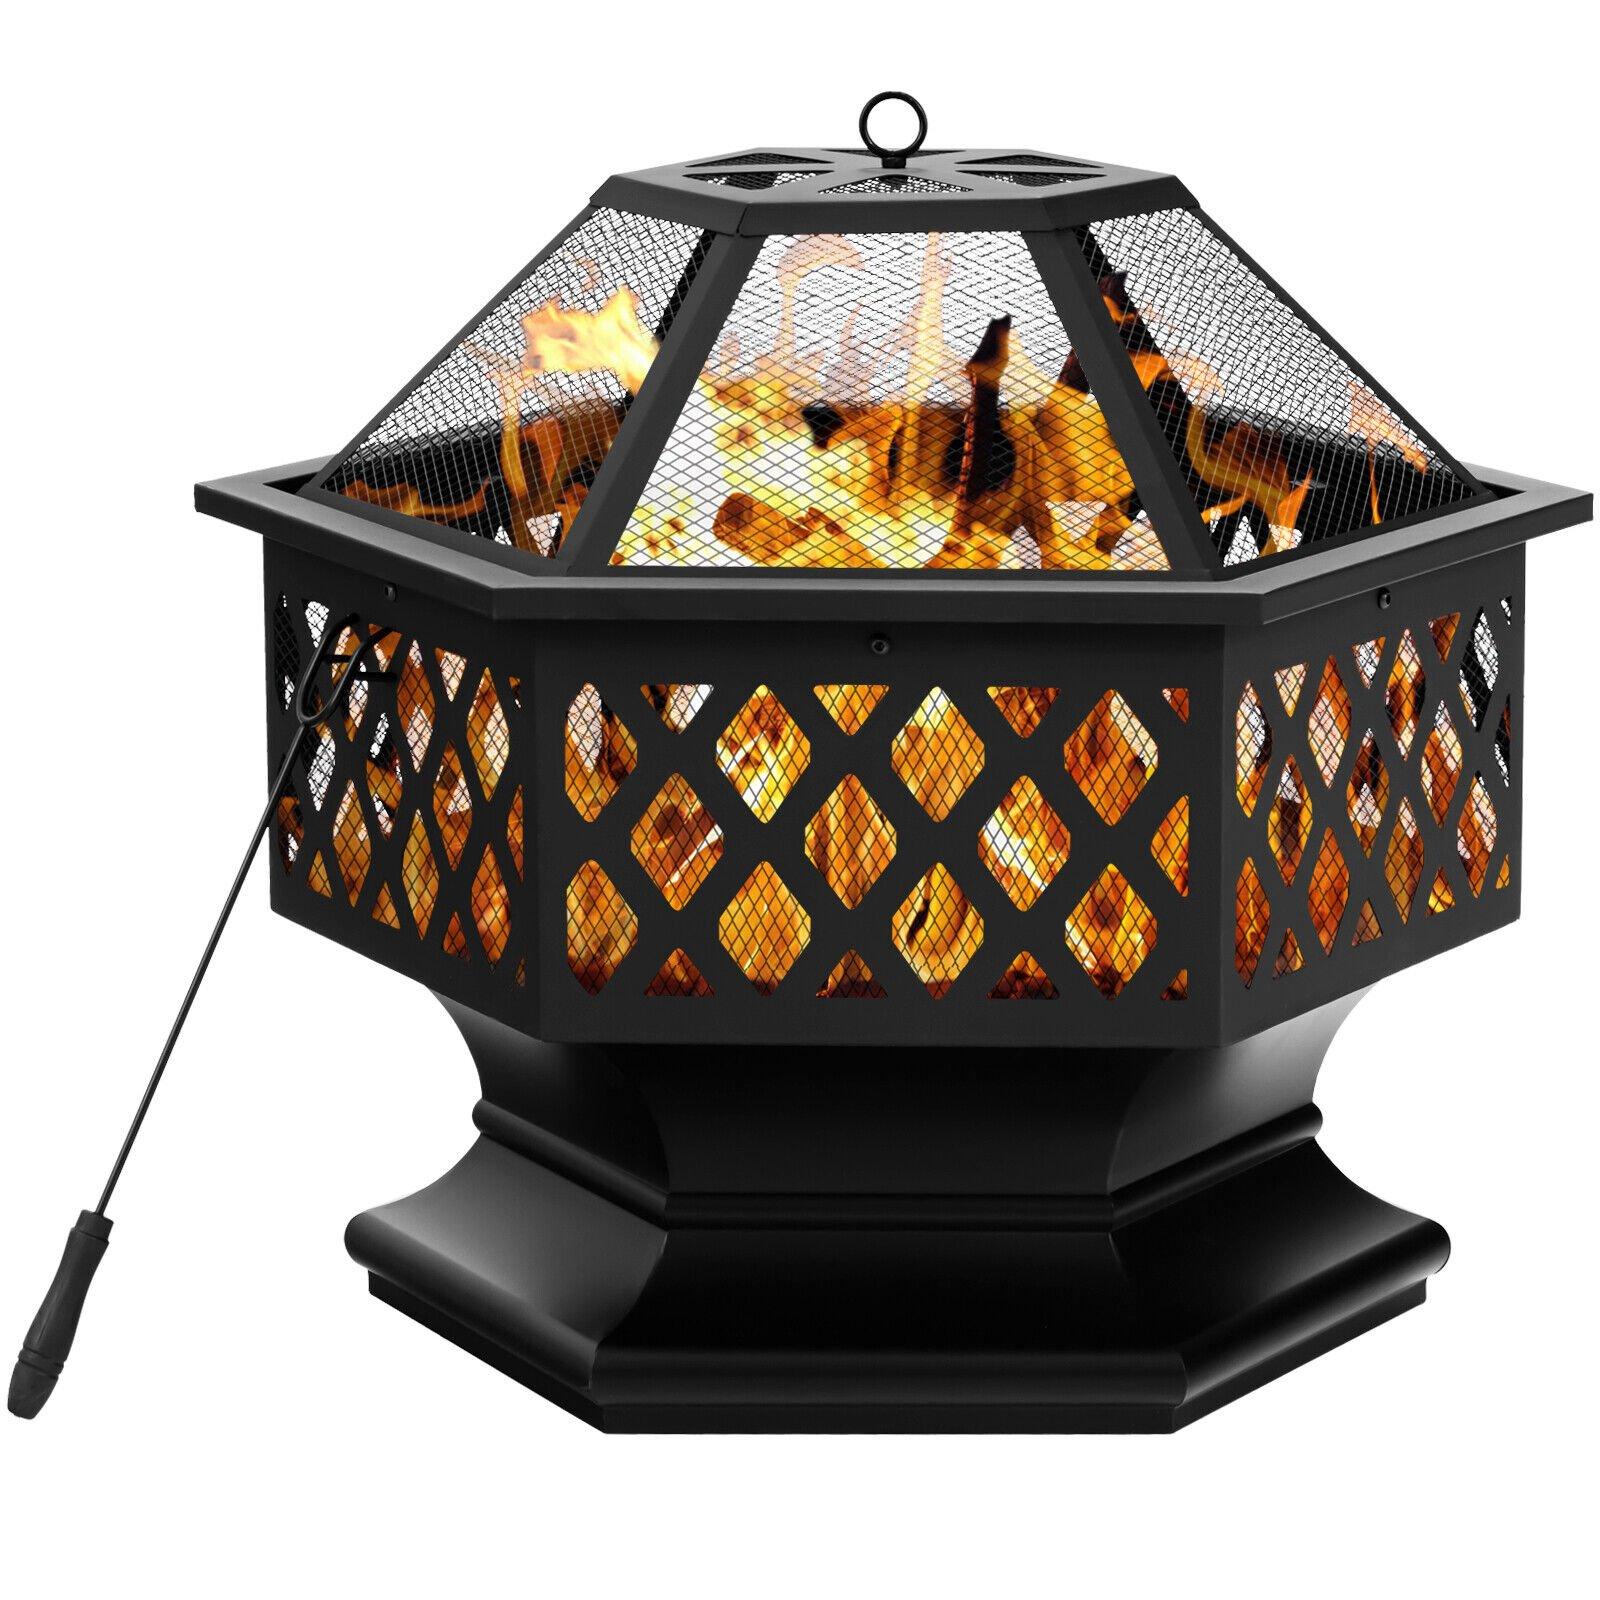 Hexagon Outdoor Fire Pit 61cm Height Iron Wood Burning Fire Bowl with Spark Screen